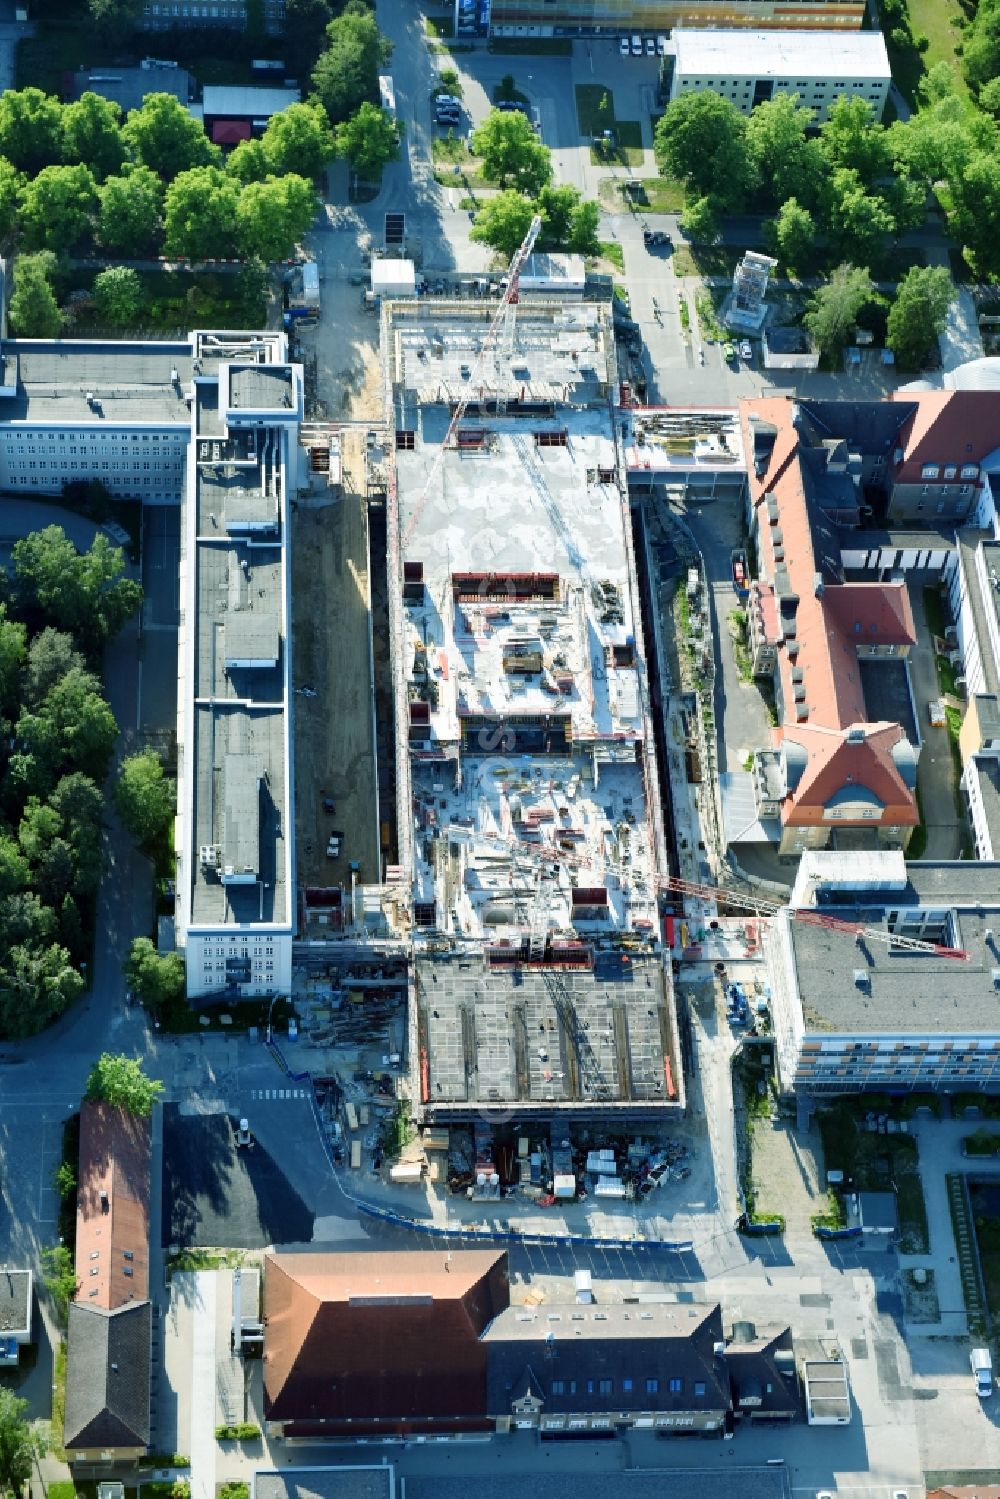 Rostock from above - Construction site company Schaelerbau for the new building of a functional building at the Campus Schillingallee in the district Hansaviertel in Rostock in the state Mecklenburg - Western Pomerania